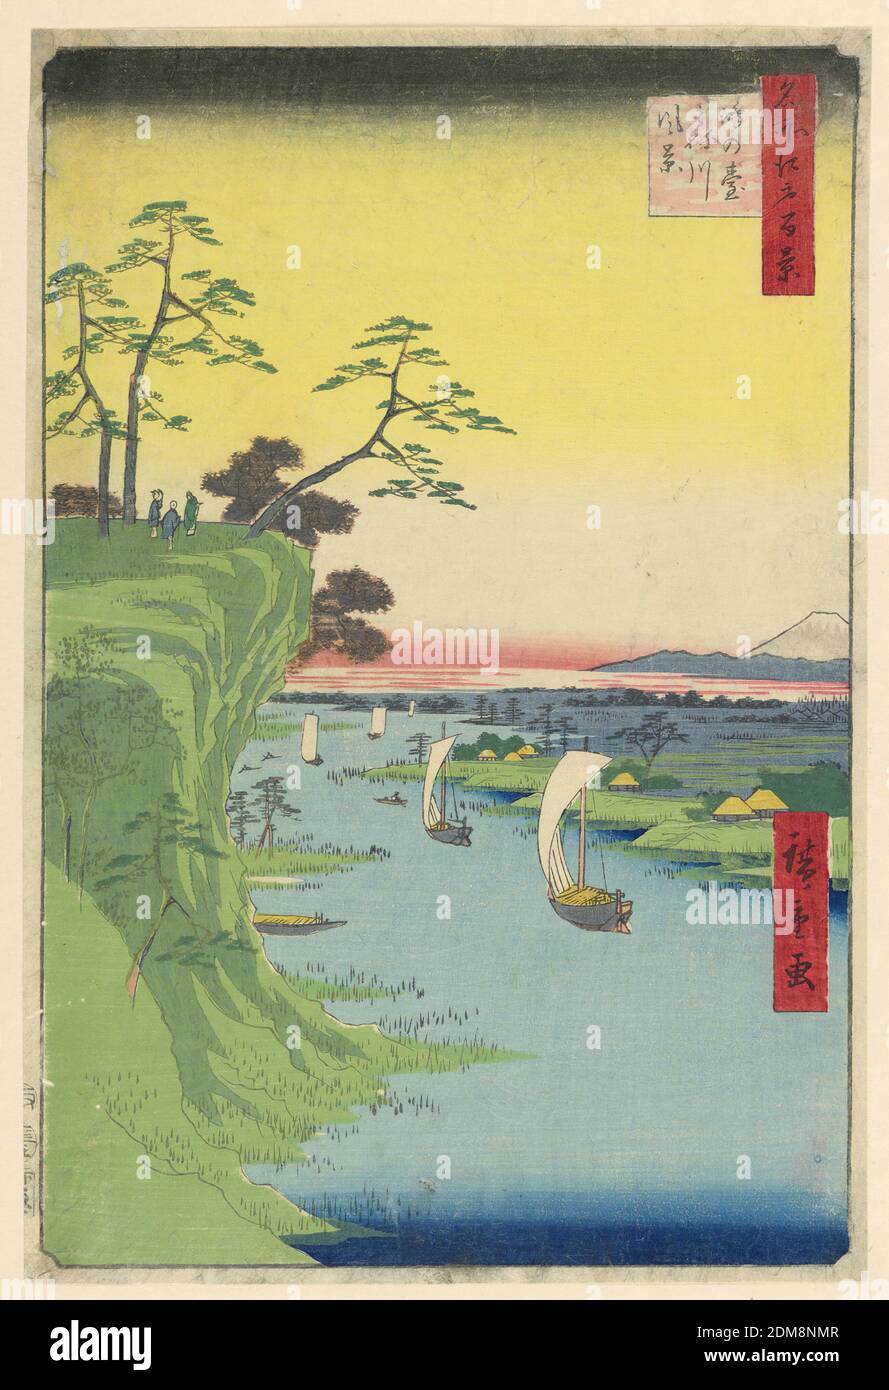 Kondai Tonegawa fukei from the Series One Hundred Views of Edo, Ando Hiroshige, Japanese, 1797–1858, Woodblock print in colored ink on paper, This tranquil view of the bluff at Kondai shows figures observing the ships sailing on the Tone River (today is known as the Edogawa.) The scenic view from this location is why it once played many vital roles in military defense. This location was the site for many battle scenes and became famous to the people of Edo. It became memorialized in historical literature written by Takizawa Bakin (1767-1848.) The outline of the red leaves on the trees Stock Photo